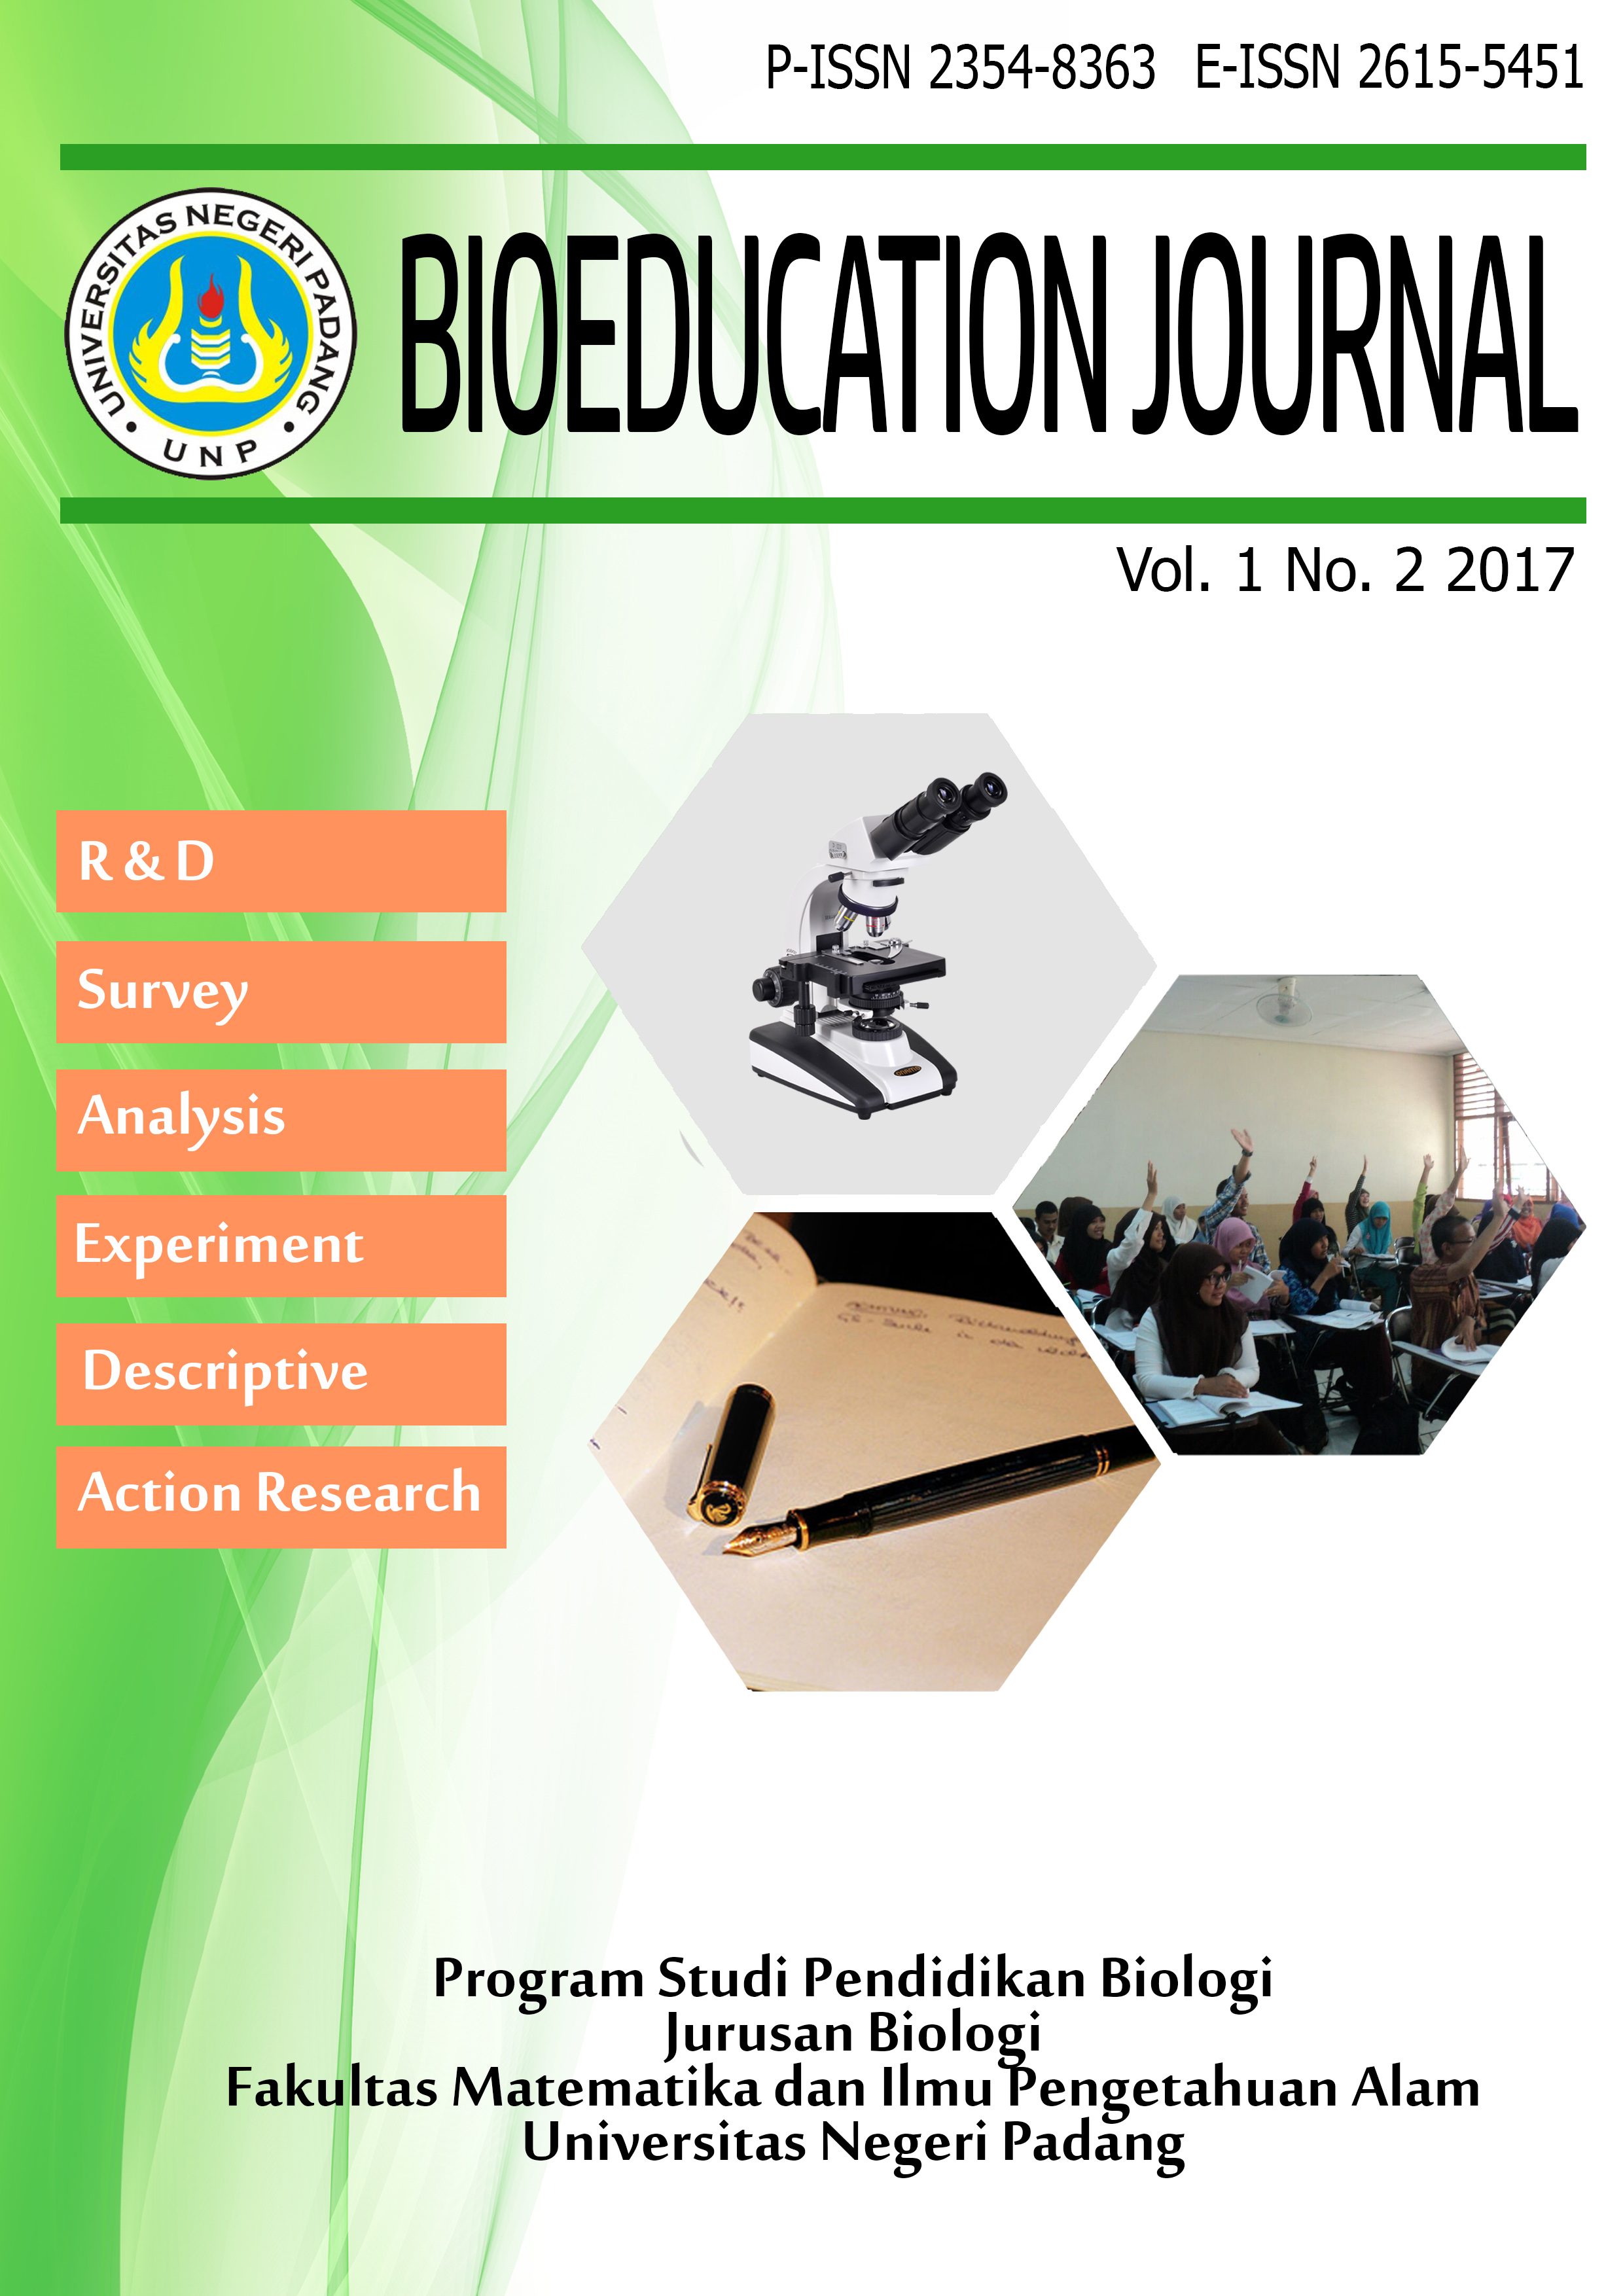 Validation of Animal Physiology Practice Guide Based on Skills of Science  Process for University Student in Major Biology Universitas Negeri Padang |  Bioeducation Journal